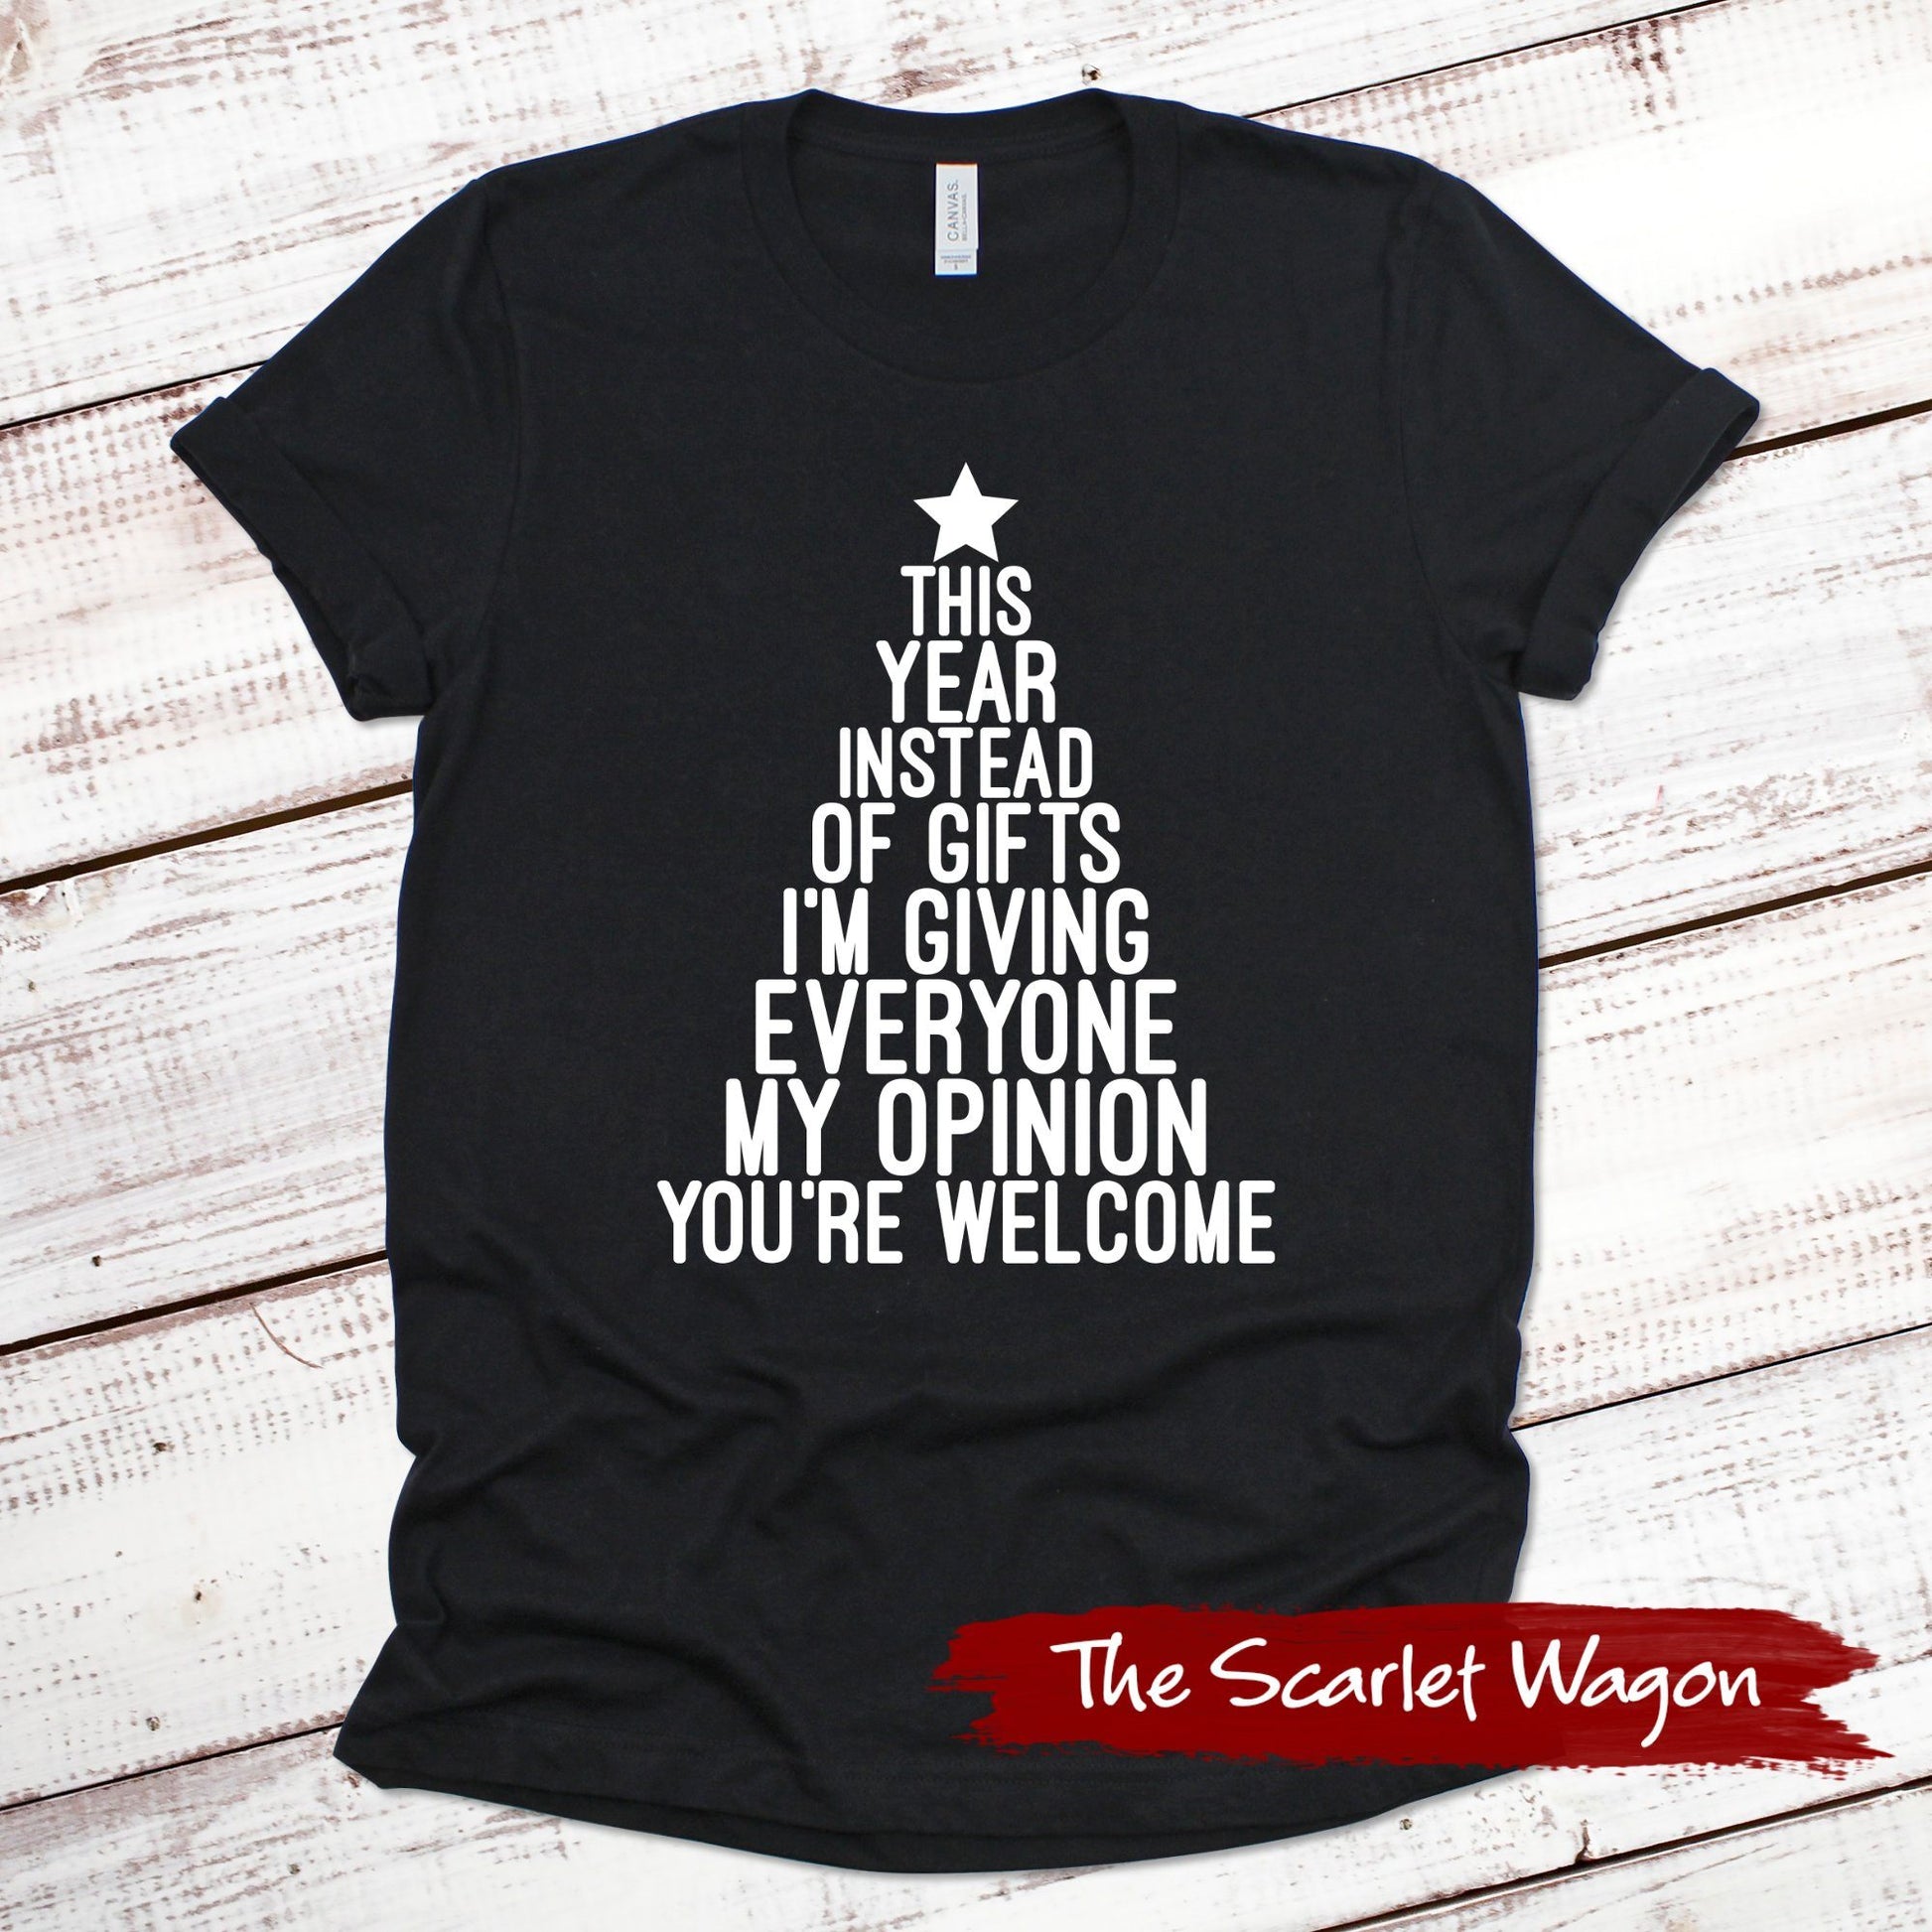 Instead of Gifts I'm Giving My Opinion Christmas Shirt Scarlet Wagon Black XS 